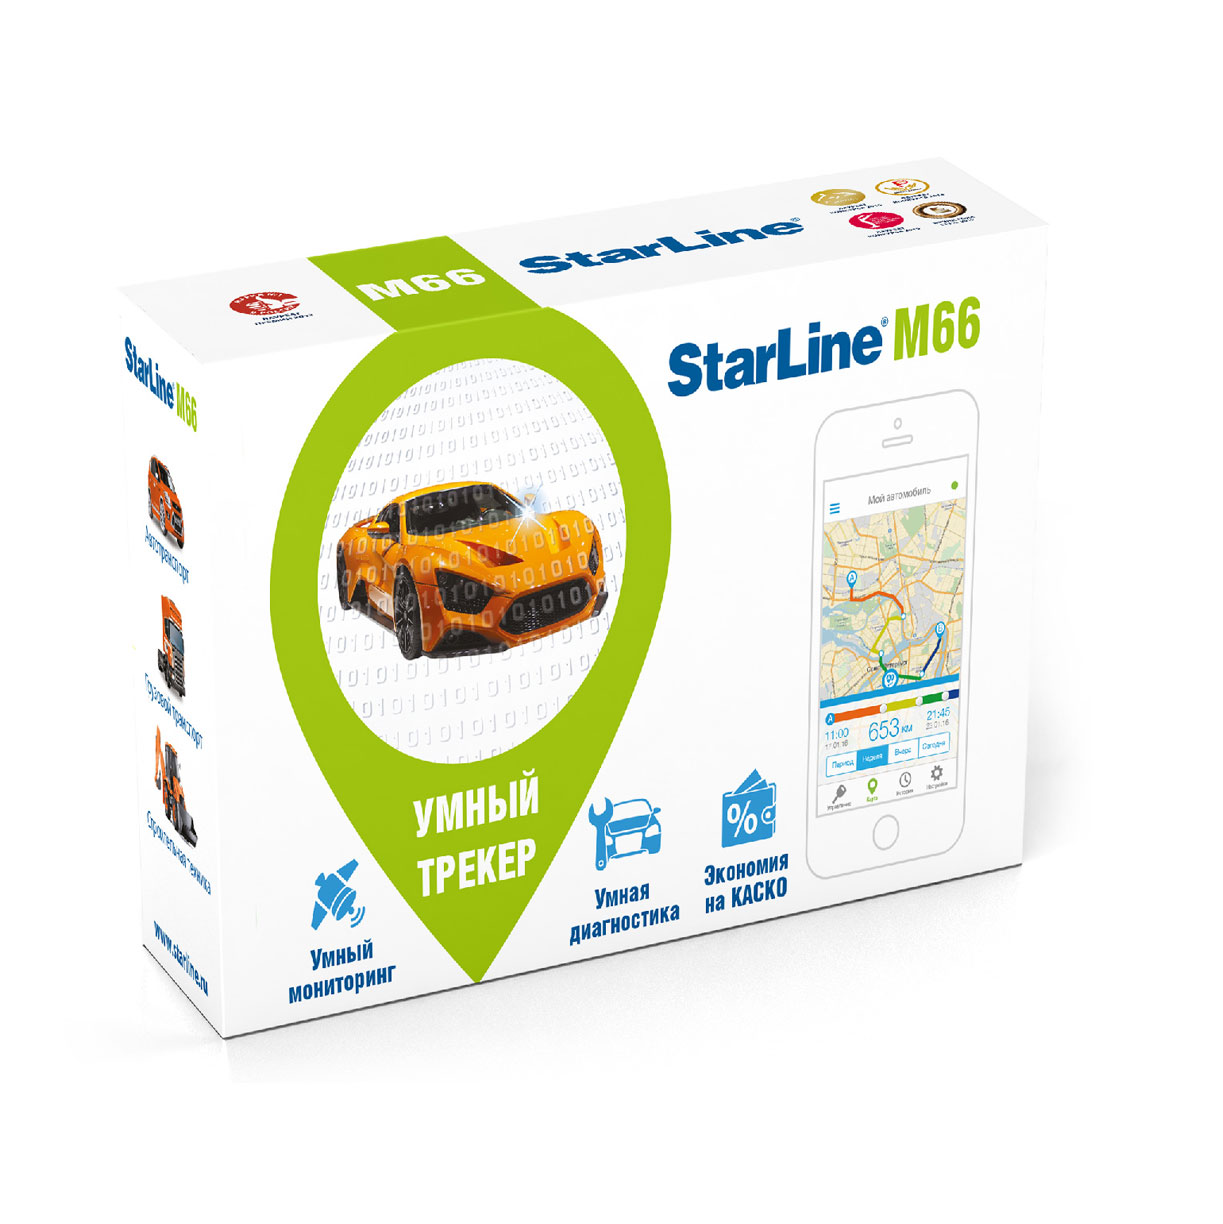 The compact smart tracker Starline M66 is designed for smart monitoring and reliable protection of passenger and freight transport. Protects. Reports. Shows